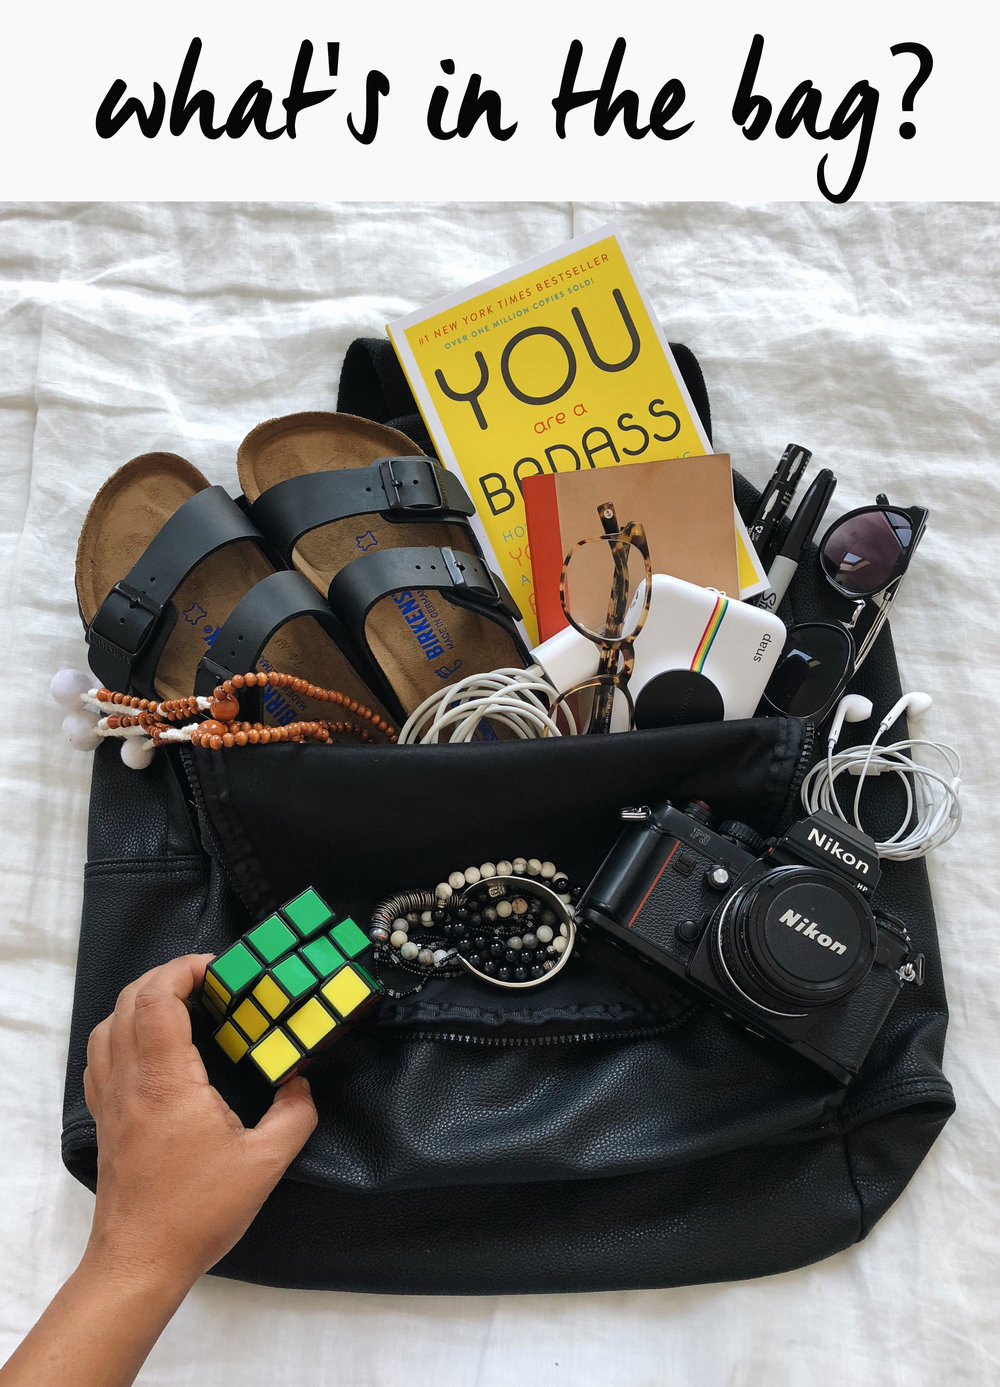 WHAT'S INSIDE MY TRAVEL BAG